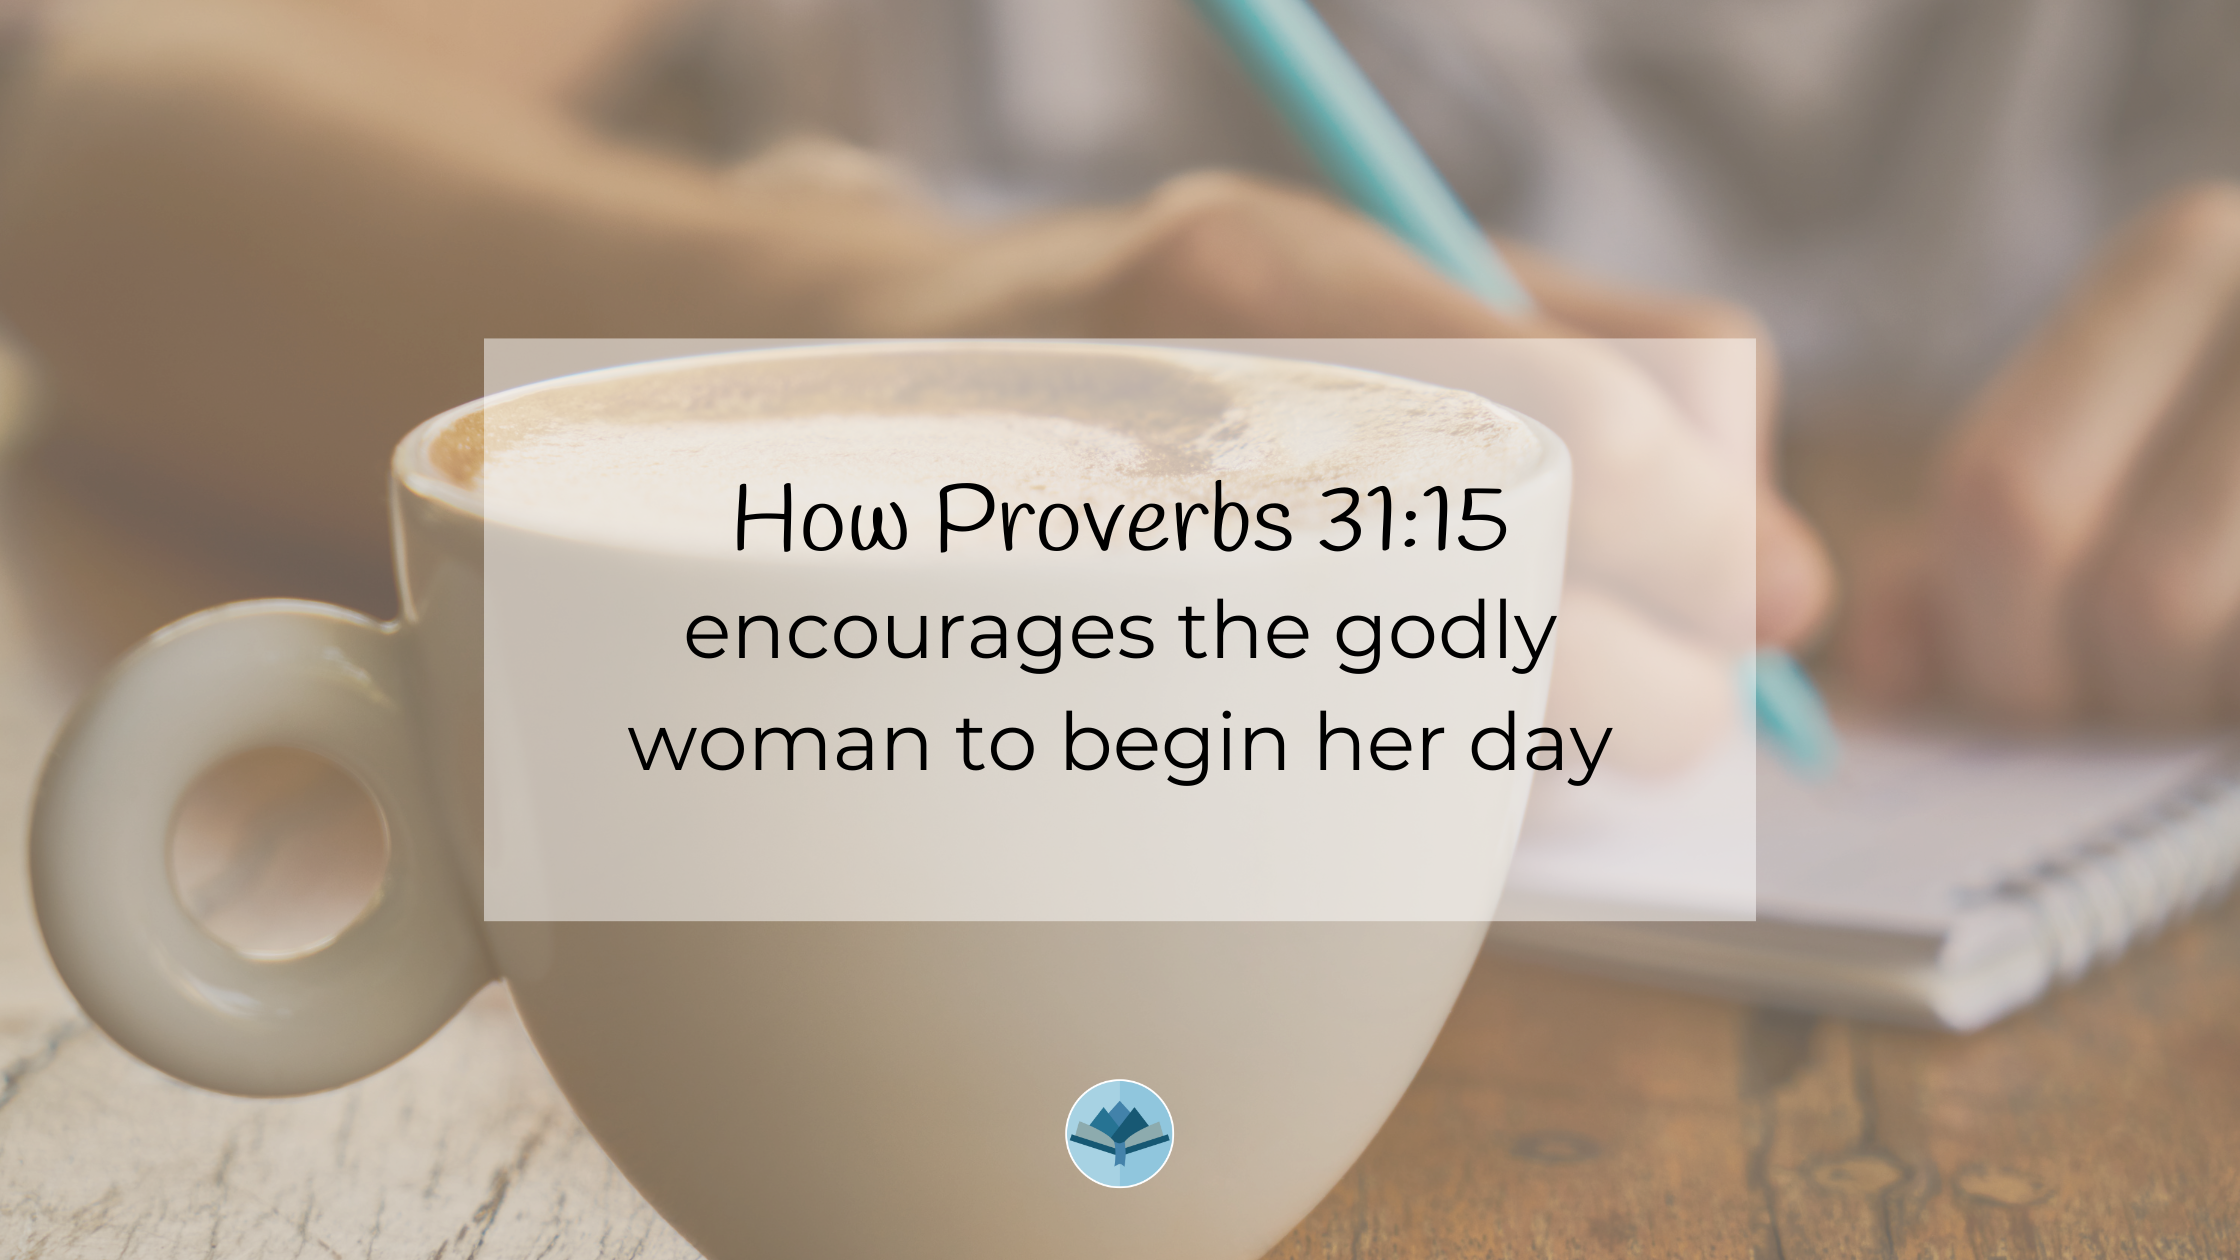 How Proverbs 31:15 encourages the godly woman to begin her day